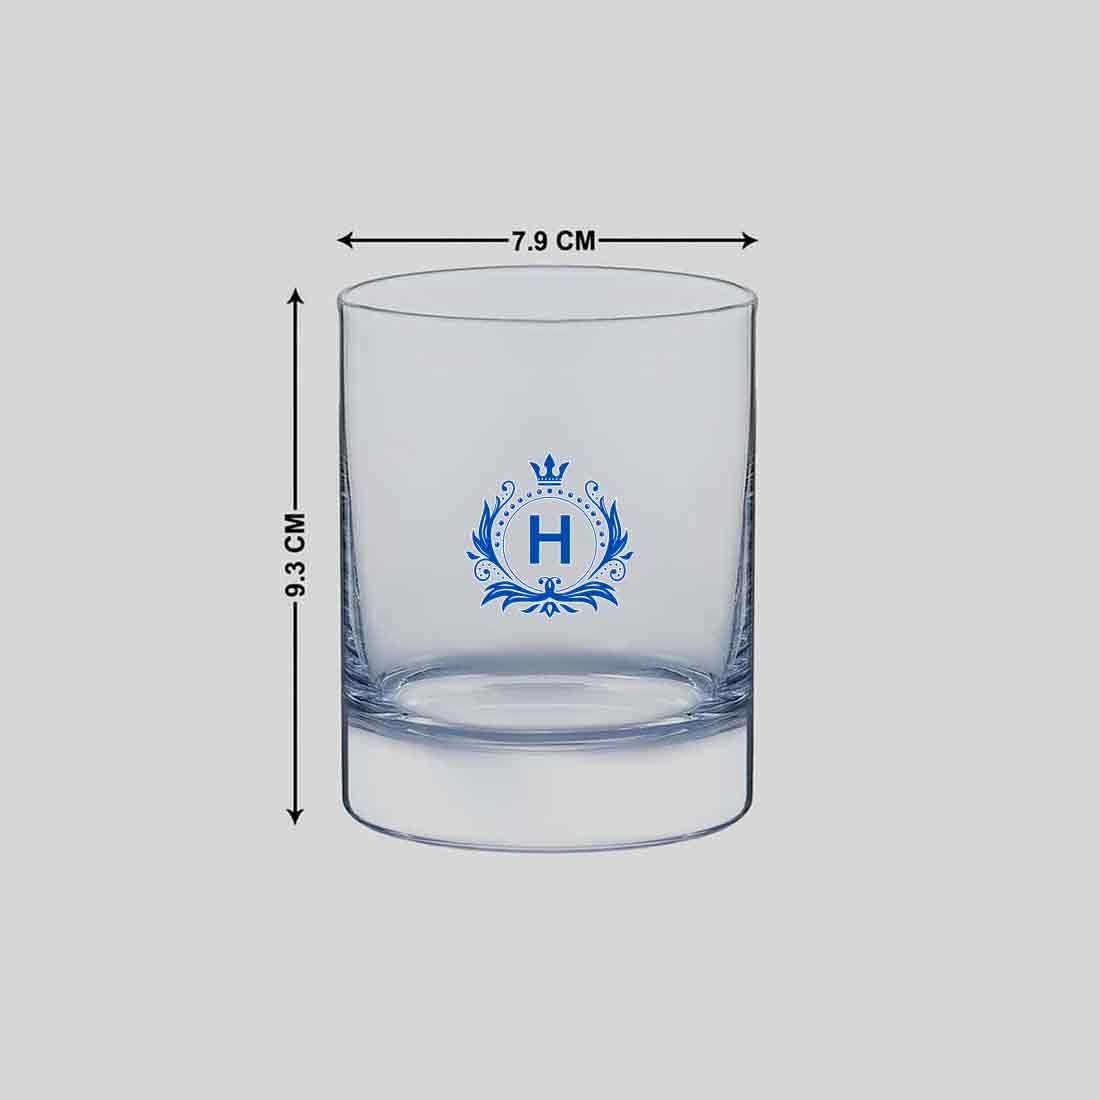 Monogrammed Whiskey Glasses - Personalized Colored Initial Alcohol Glass